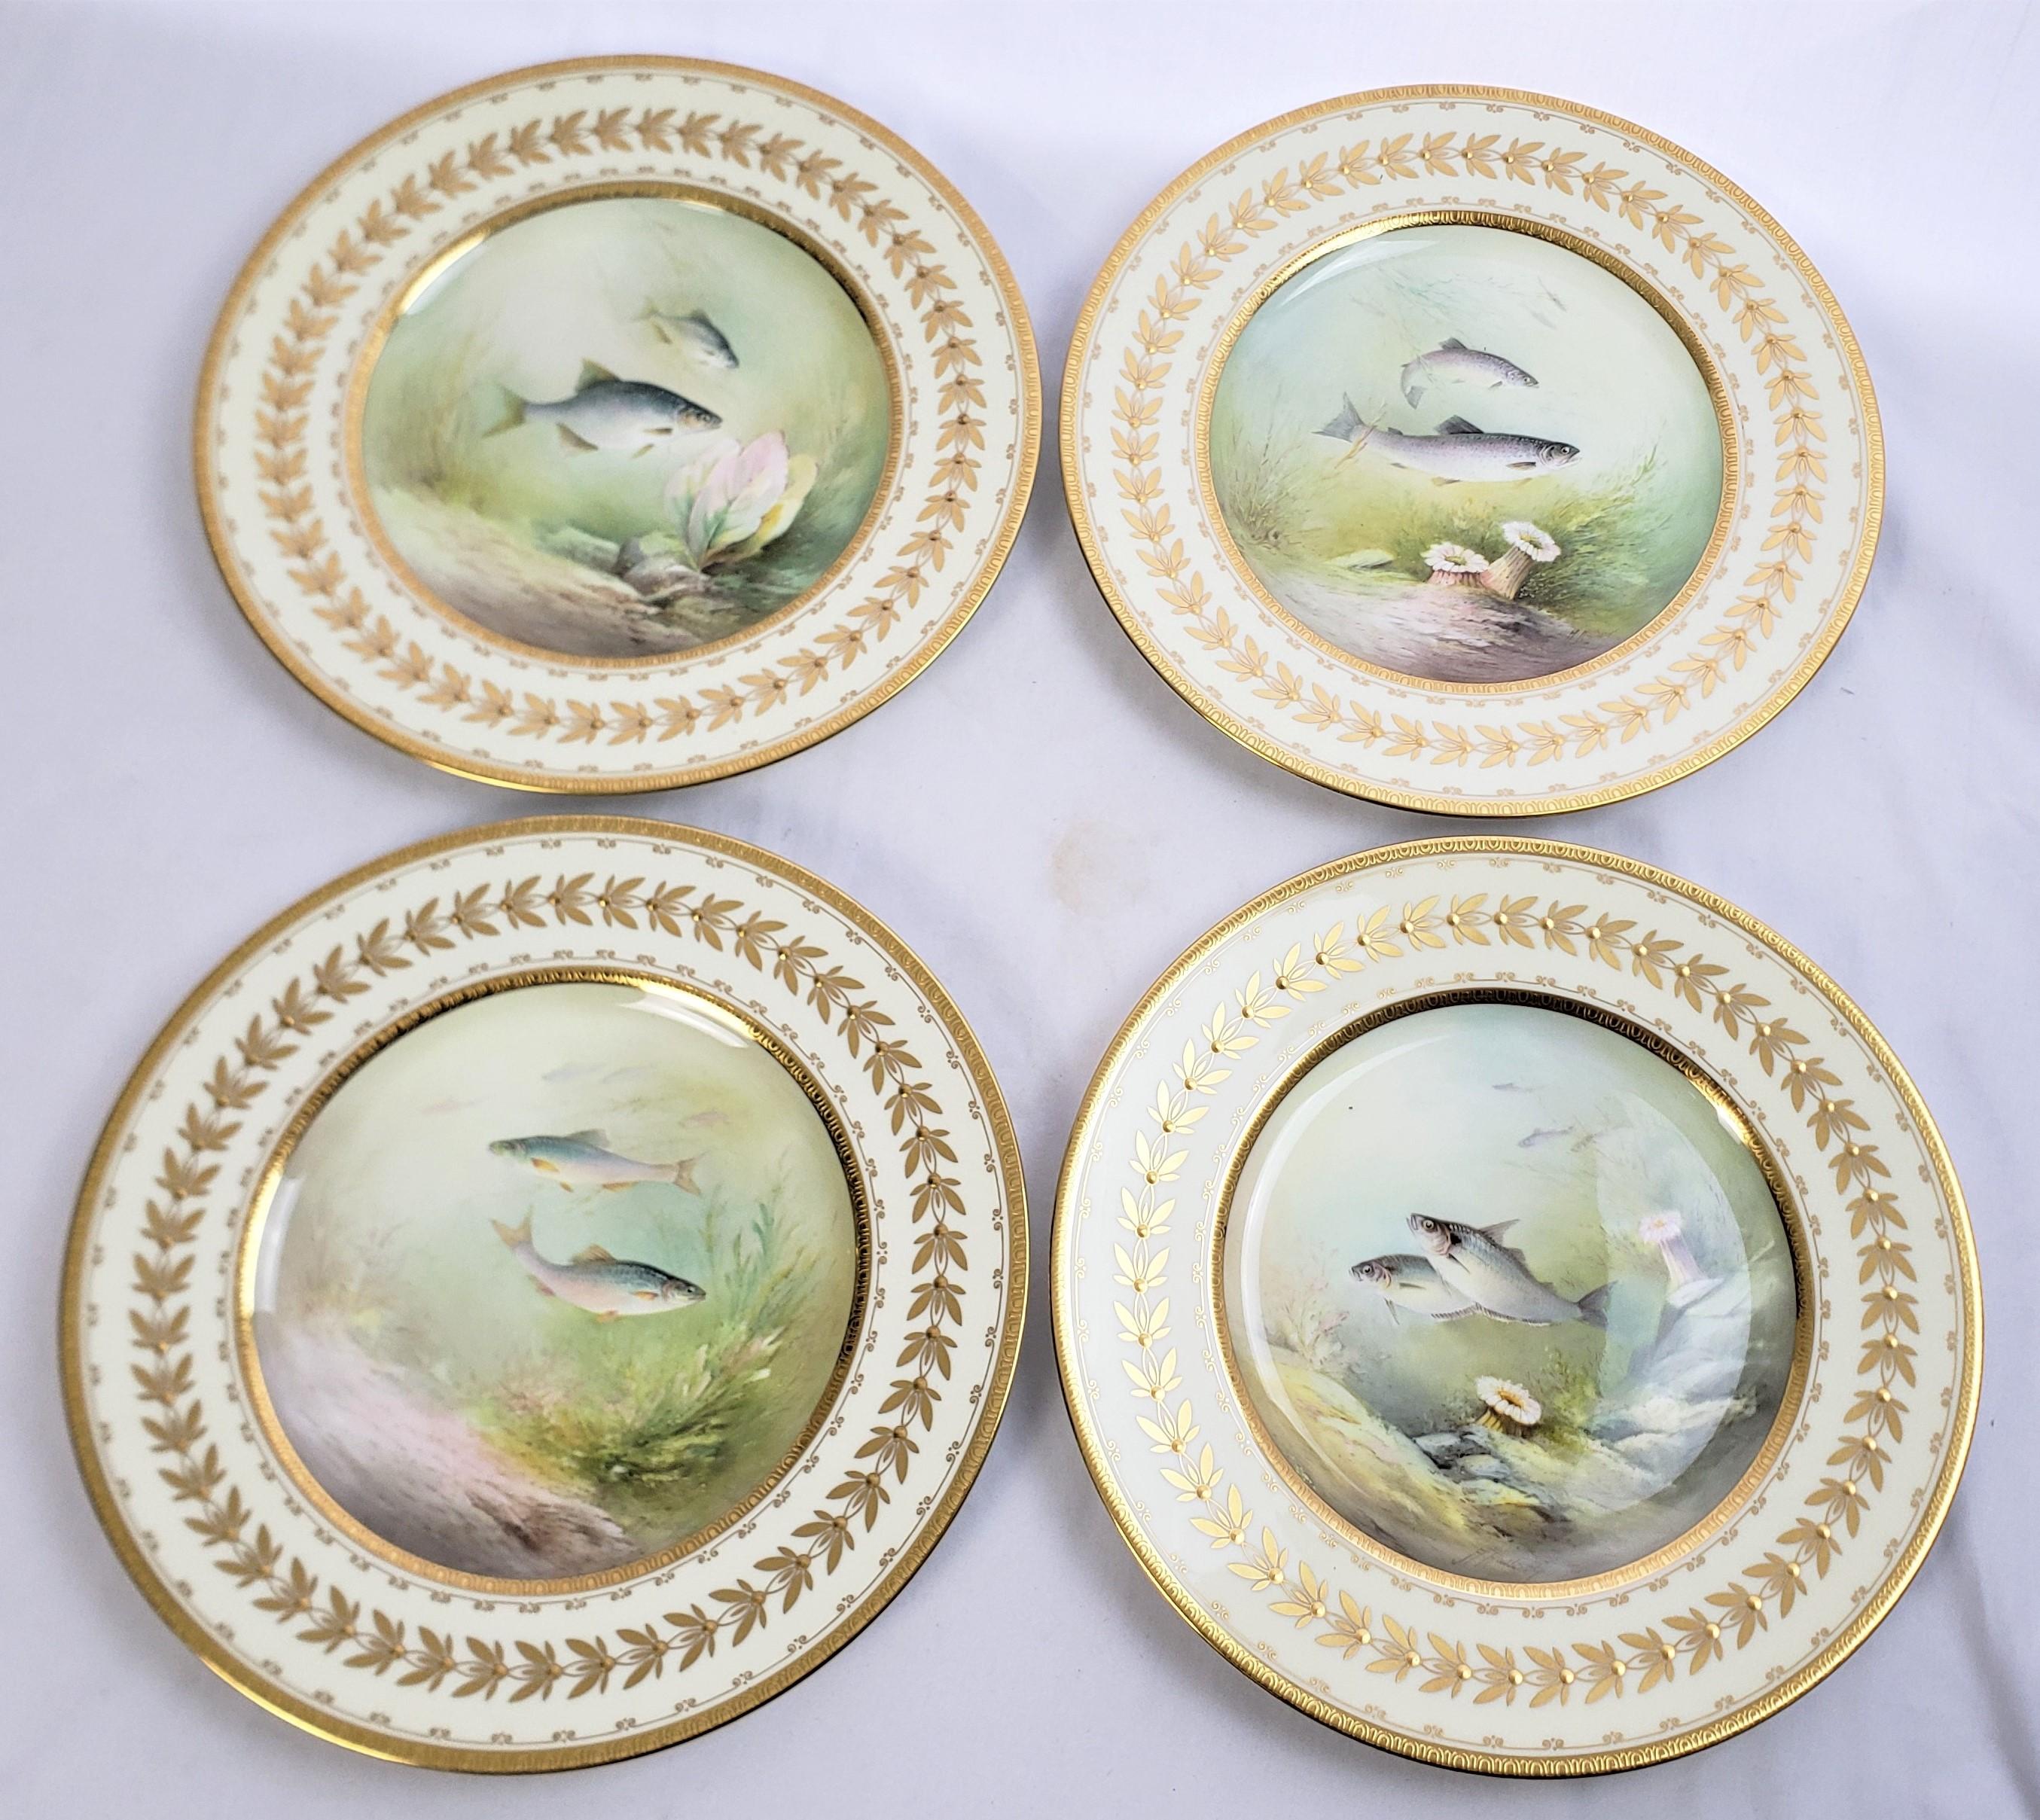 20th Century 12 Antique Minton Hand-Painted Cabinet Plates Signed A. Holland Depicting Fish For Sale